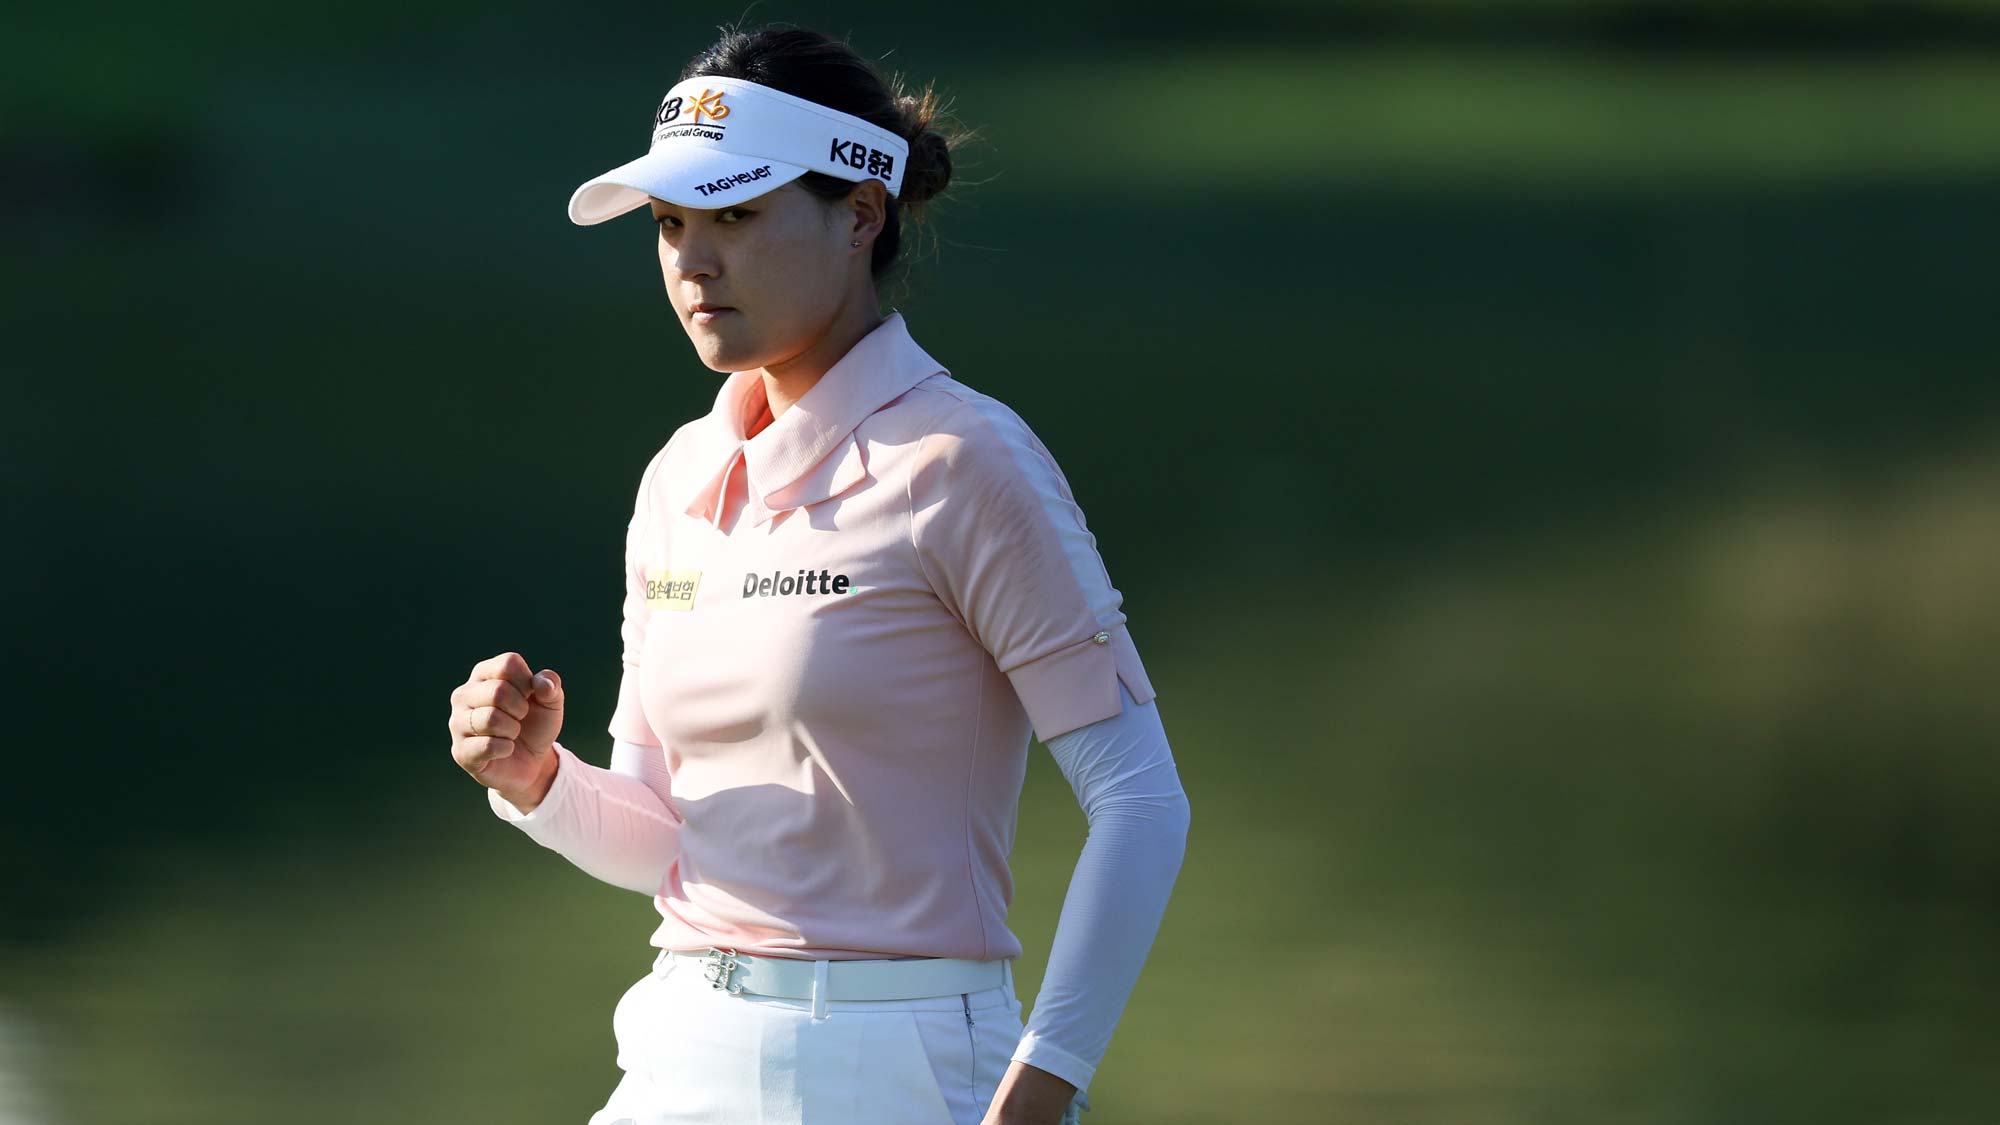 In Gee Chun of South Korea waves after putting out on the 18th greenduring the second round of the KPMG Women's PGA Championship at Congressional Country Club